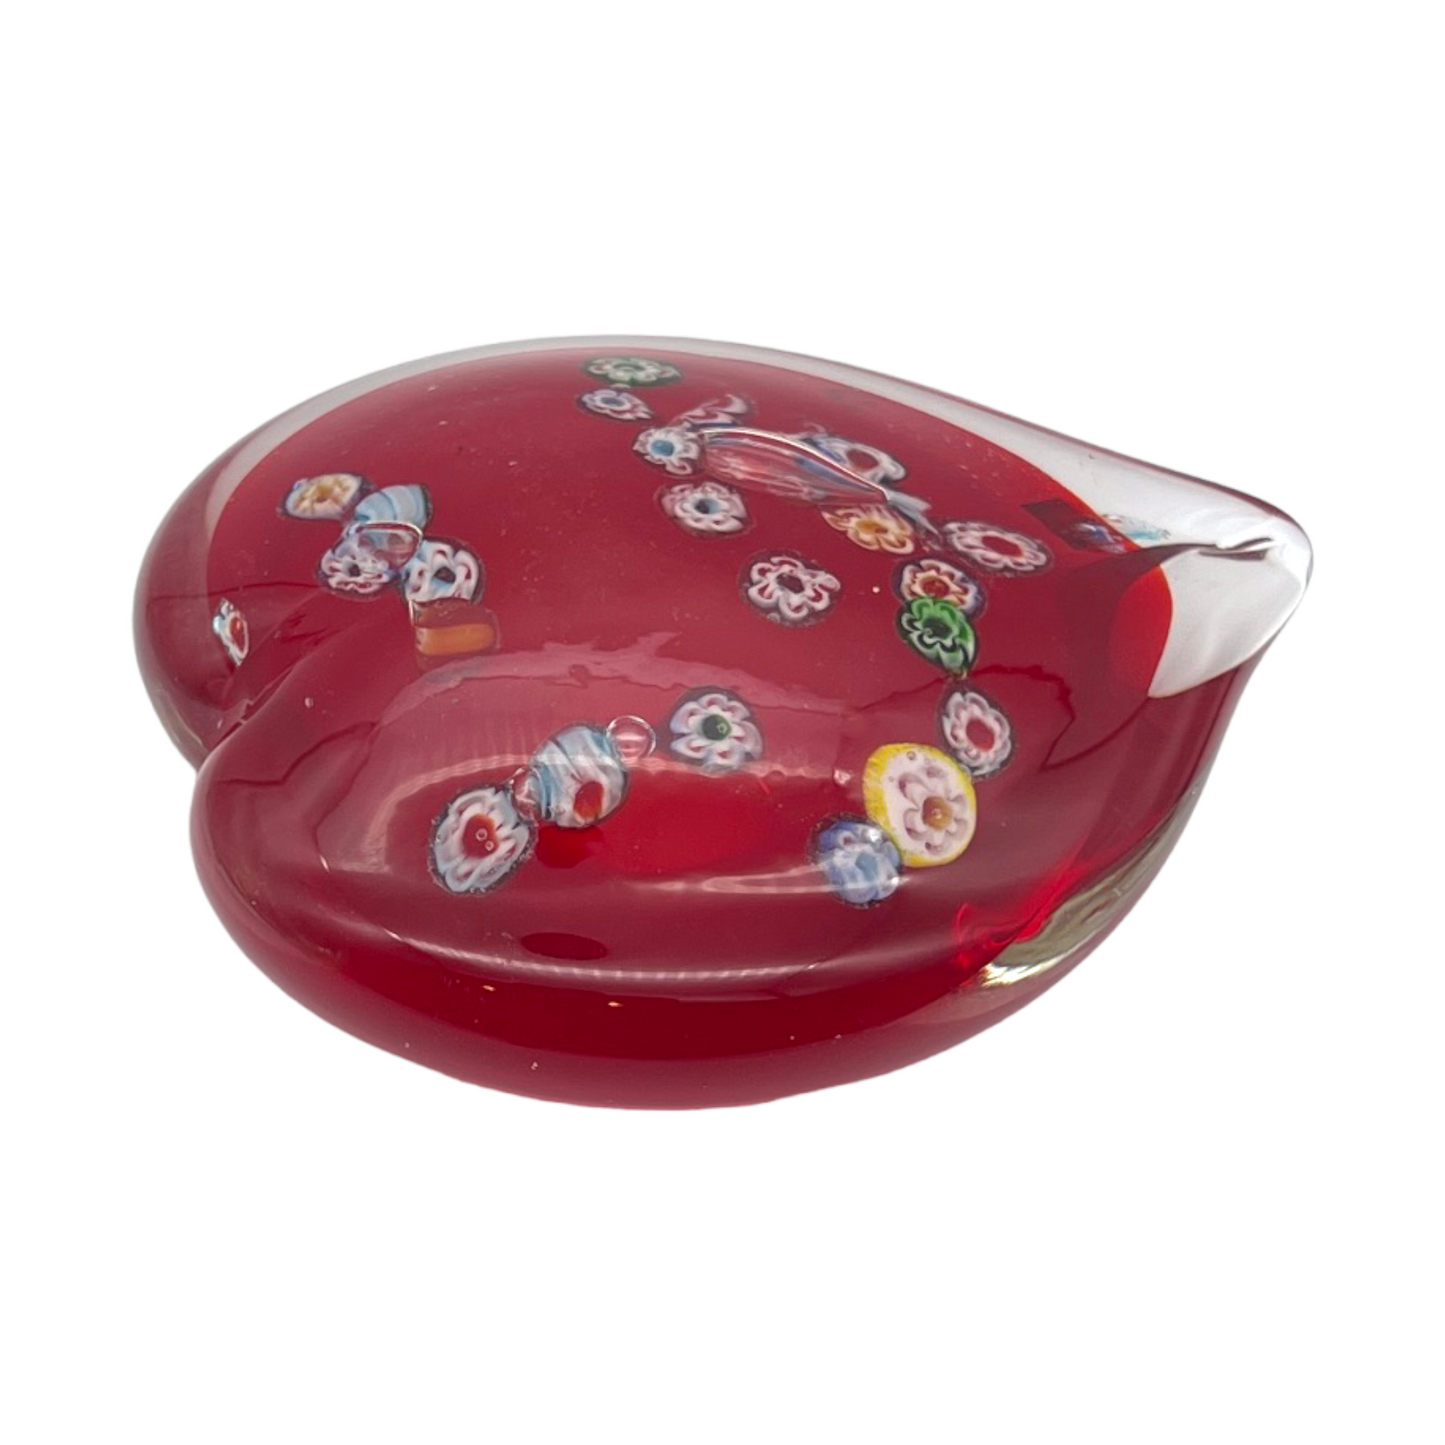 Captivating Artistry: Vibrant Millefiori Heart Paperweight - 1.5"